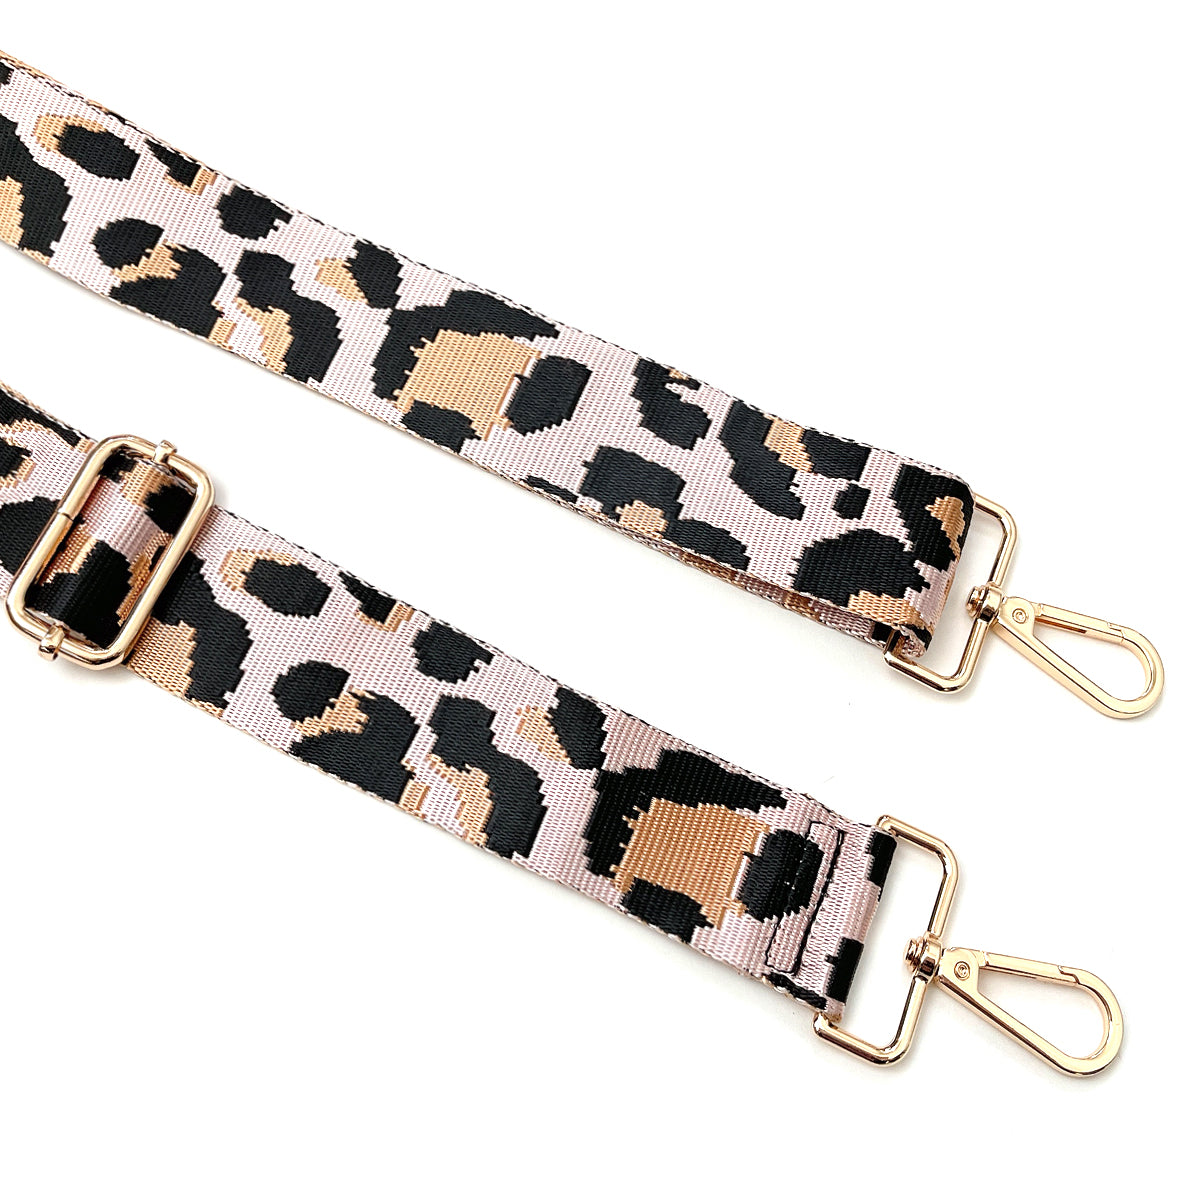 Wrapables Wide Adjustable Crossbody Handbag Strap, Women's Replacement Bag Strap for Purses Gray Leopard Print